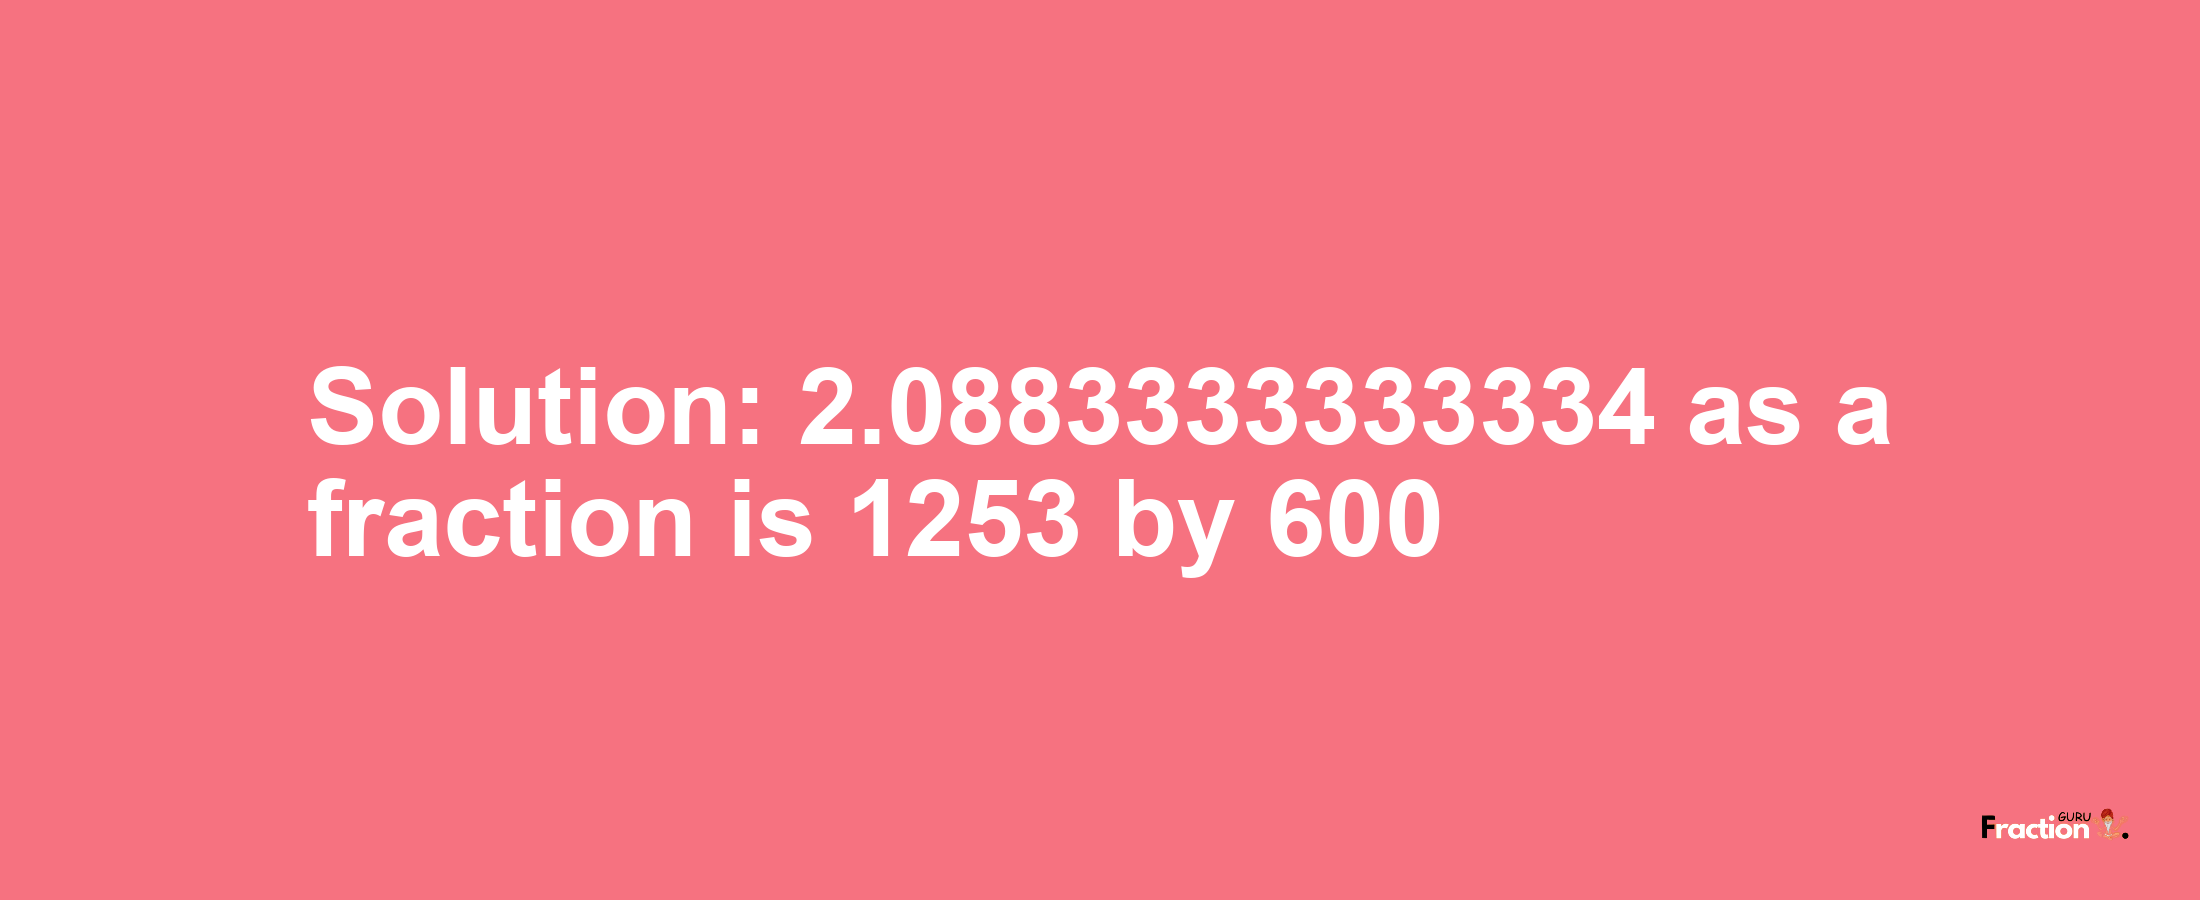 Solution:2.0883333333334 as a fraction is 1253/600